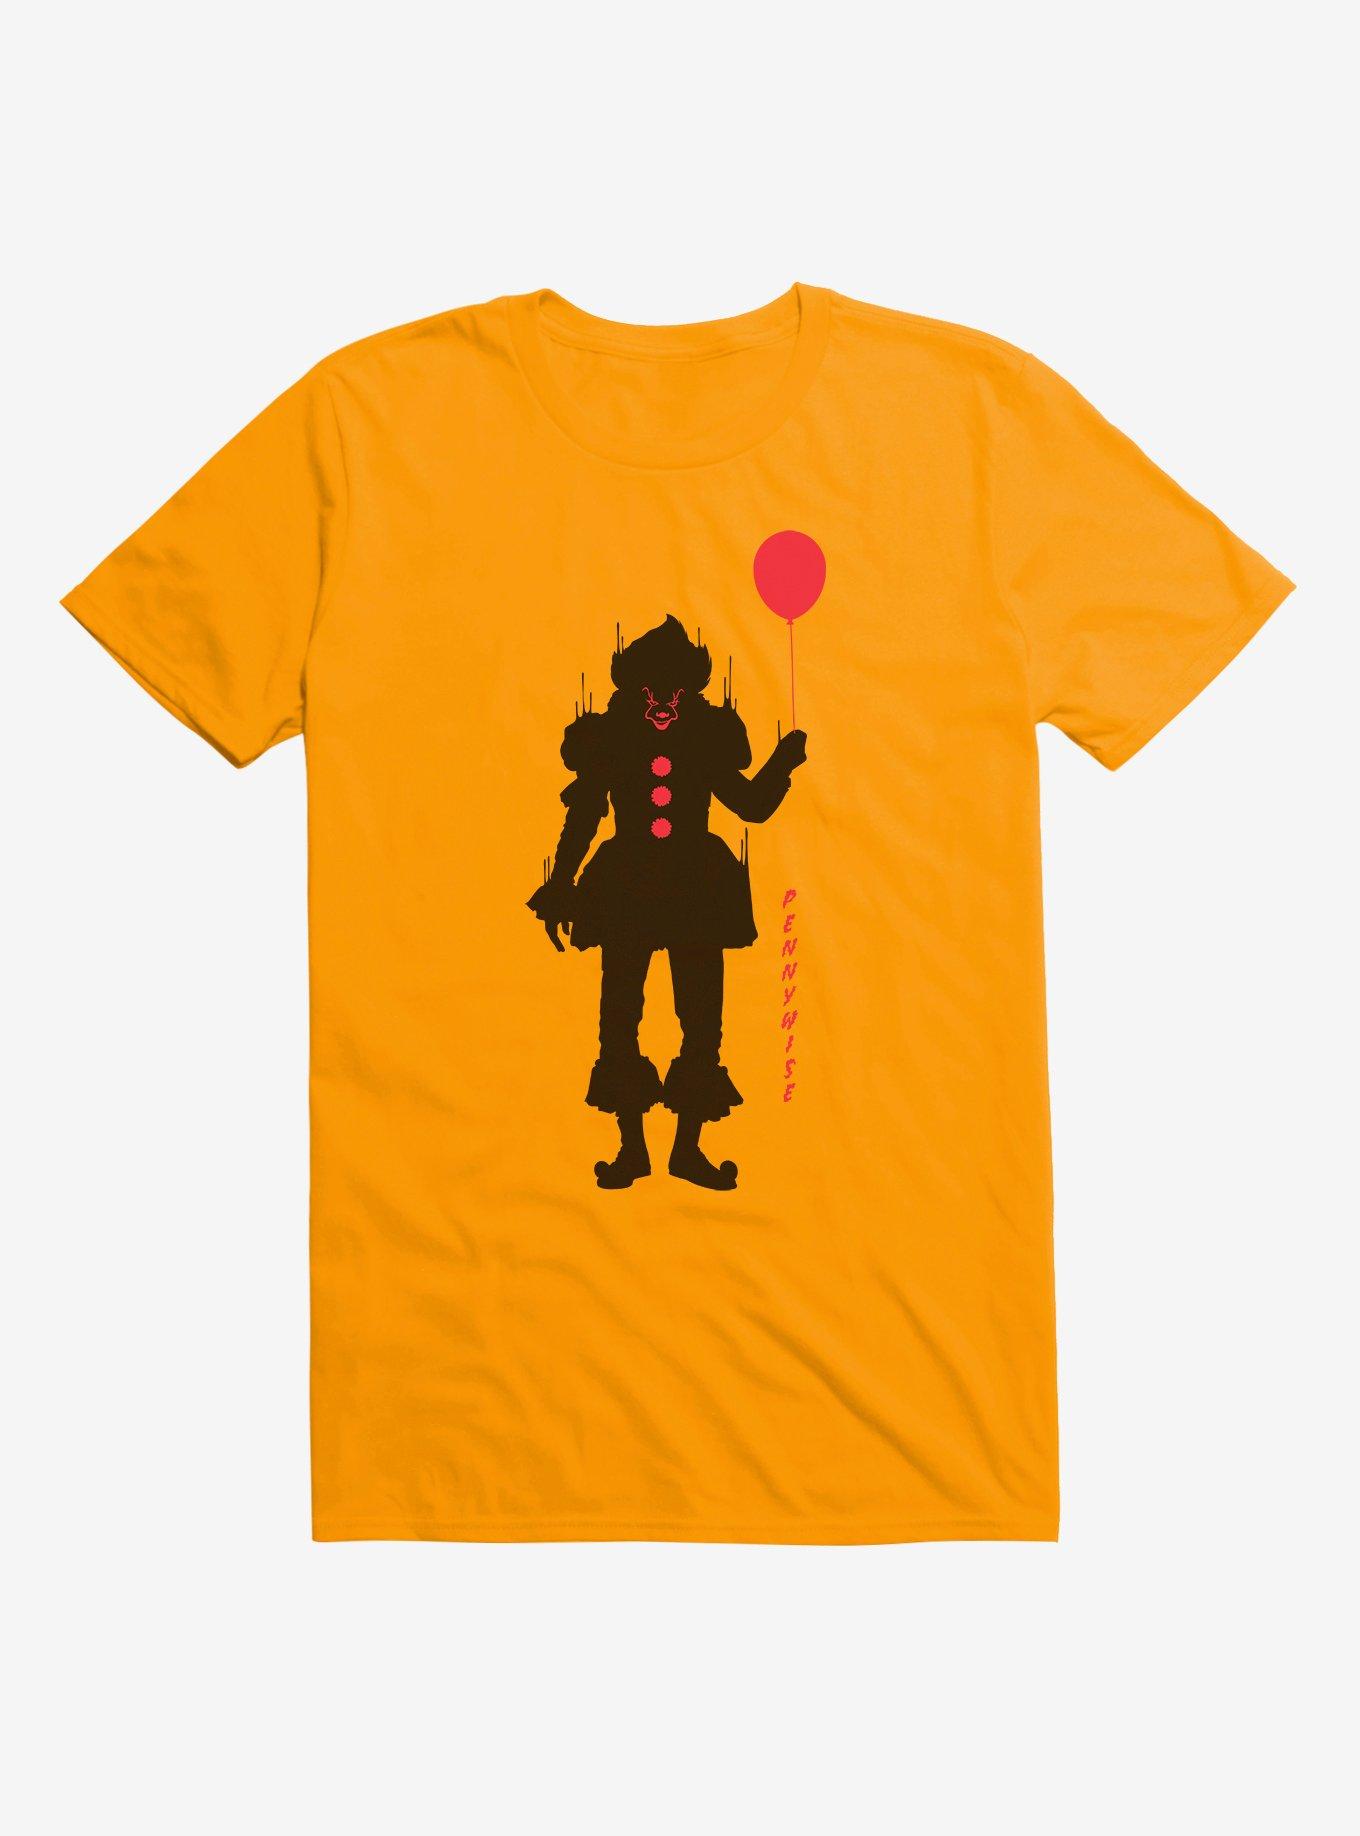 IT Chapter Two Pennywise With Balloon T-Shirt